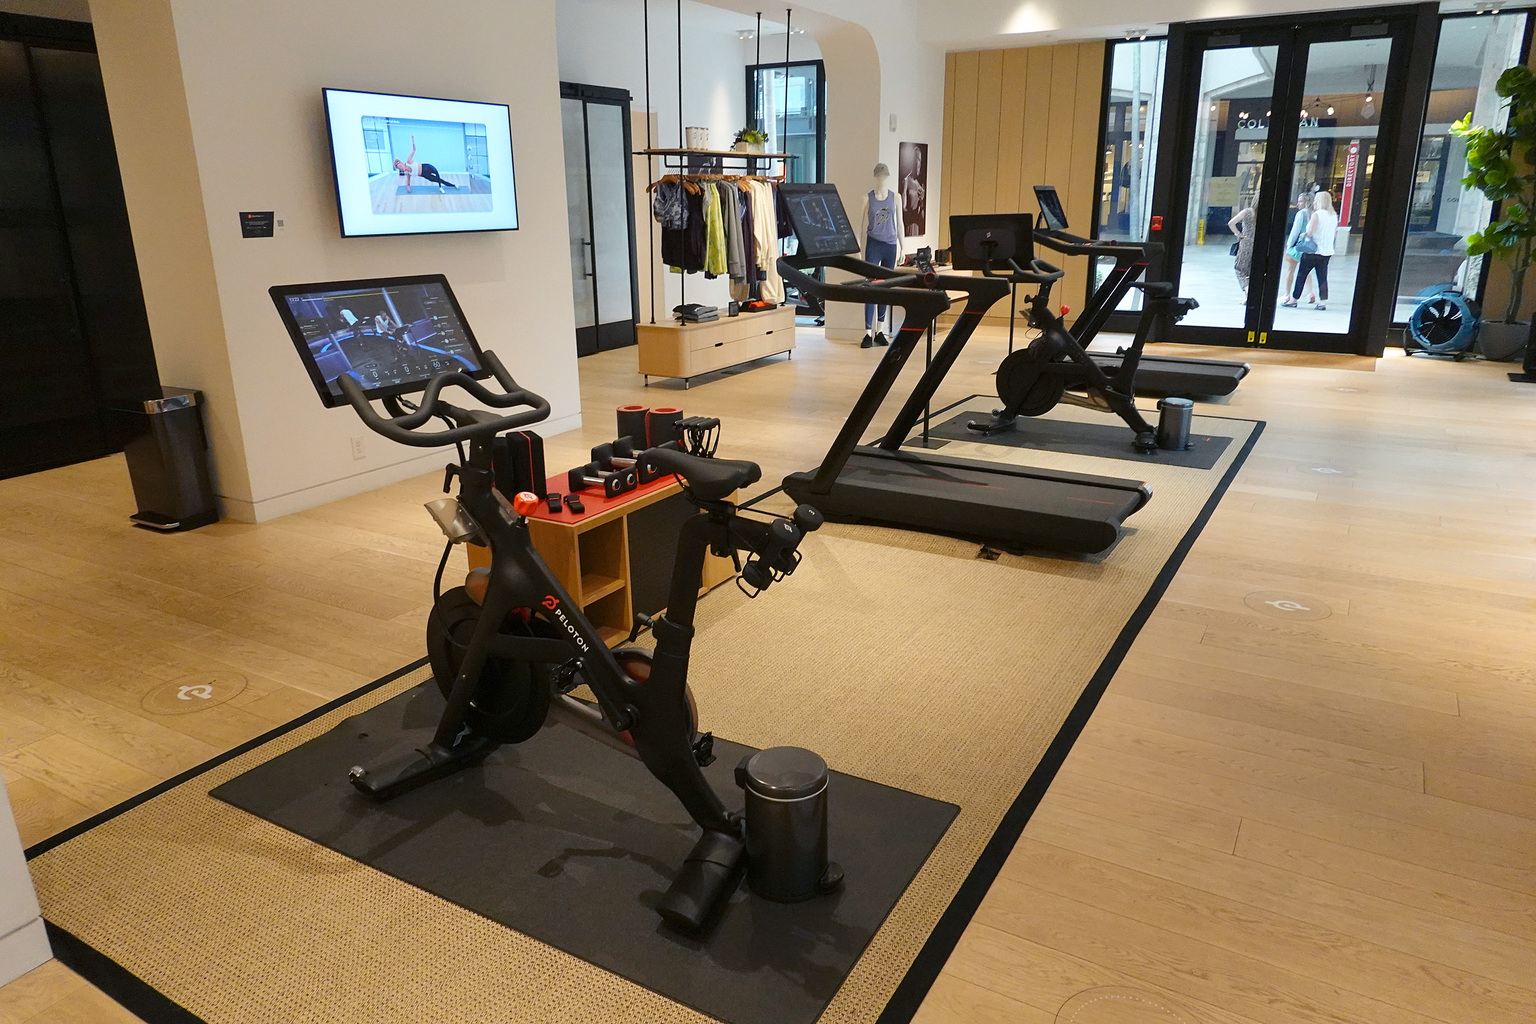 seekingalpha.com - BlackNote Investment - Peloton Vs. Technogym: Which Is The Best Fitness Stock